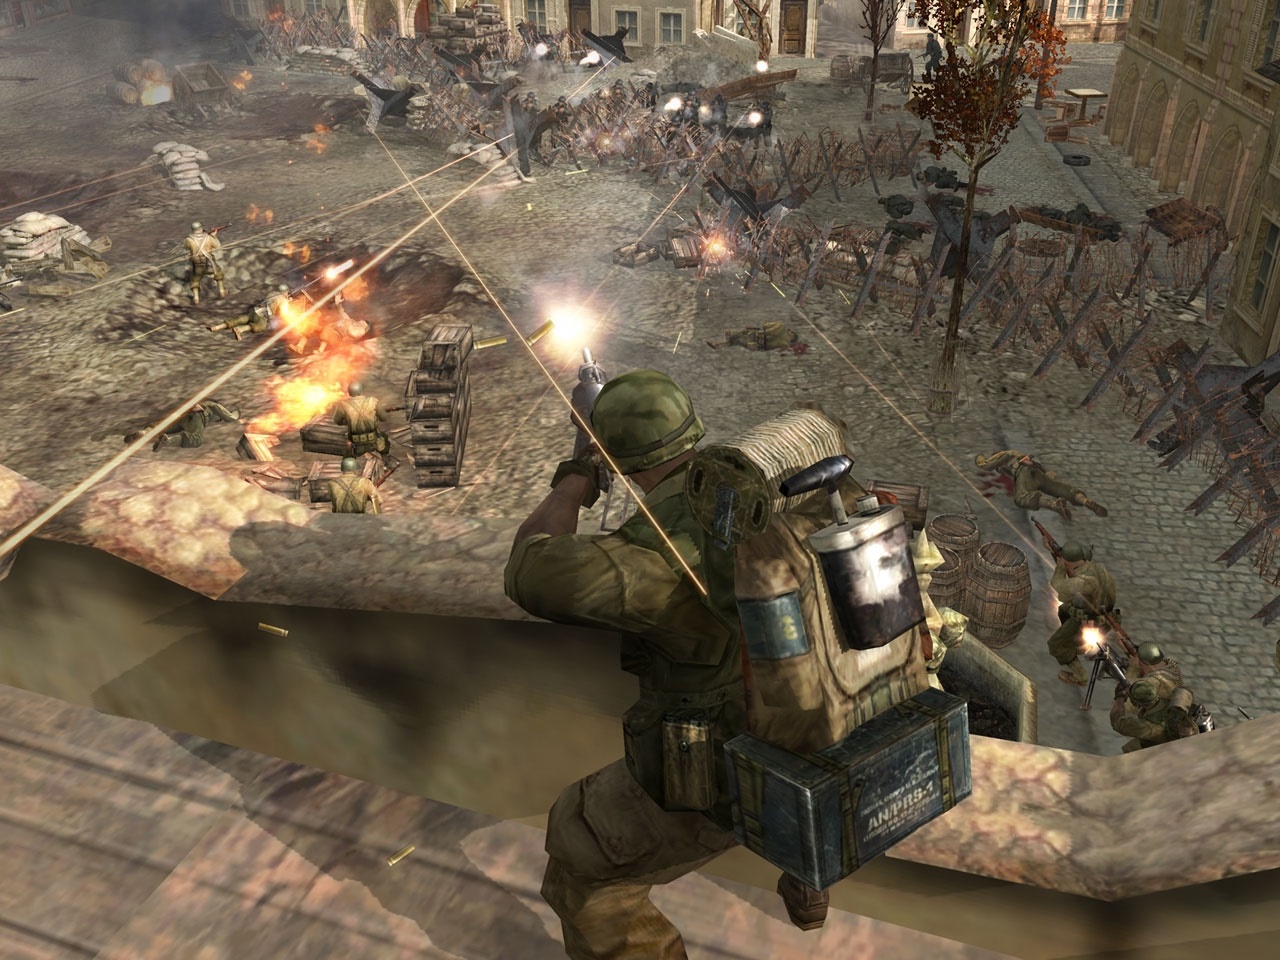 company of heroes steam edition graphics mod